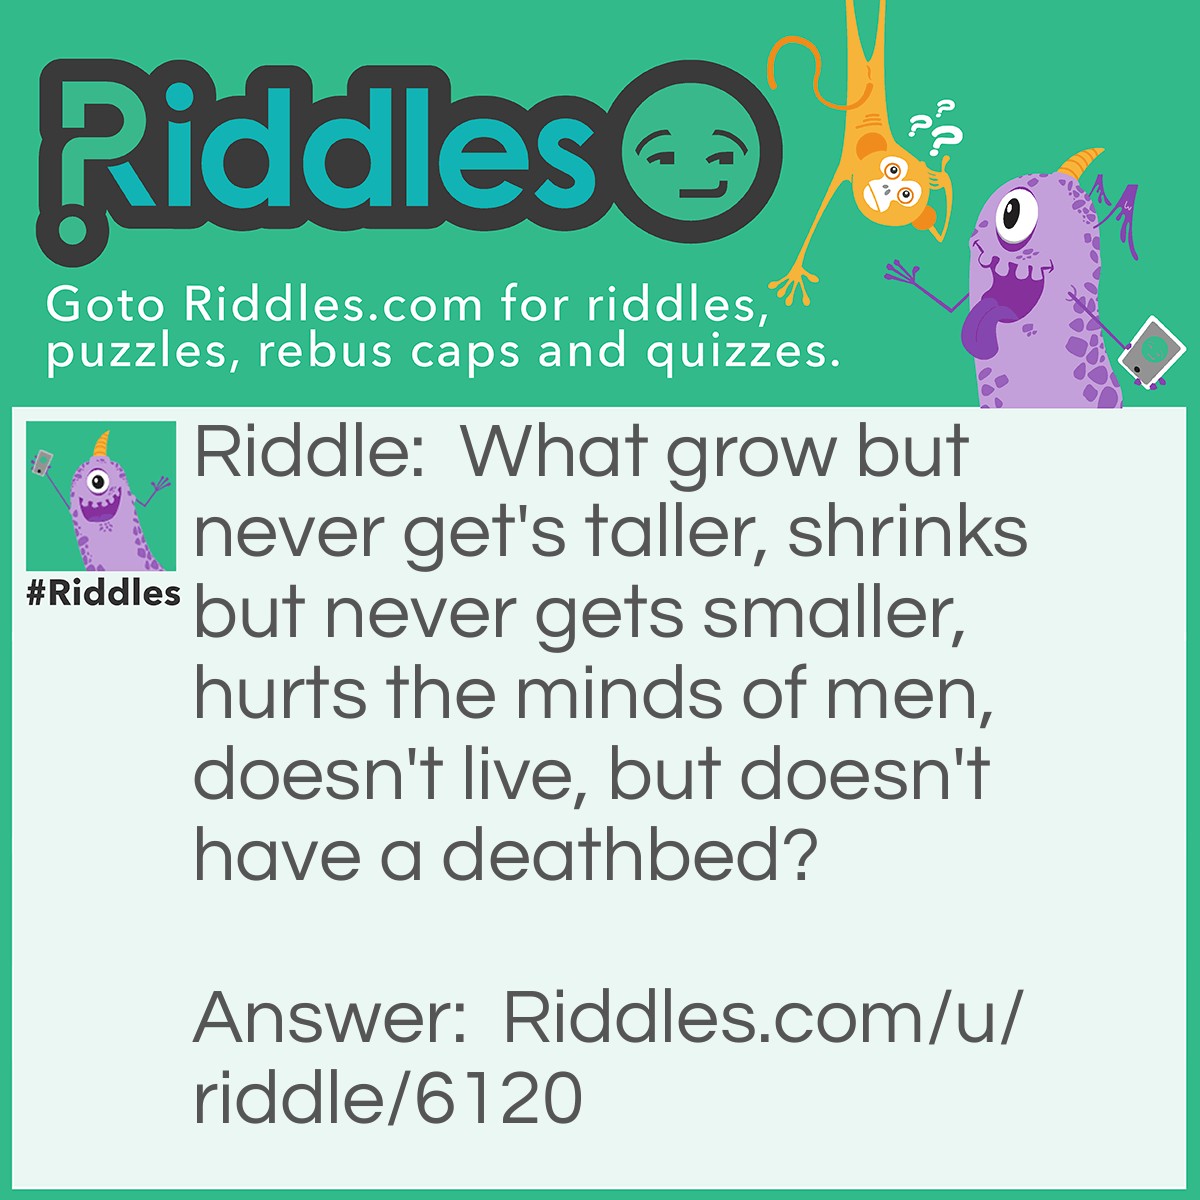 Riddle: What grow but never get's taller, shrinks but never gets smaller, hurts the minds of men, doesn't live, but doesn't have a deathbed? Answer: SOUND. Sound grows and shrinks but, realistically, doesn't do either. Can hurt ears and the brain at certain frequencies. Doesn't live and isn't dead.